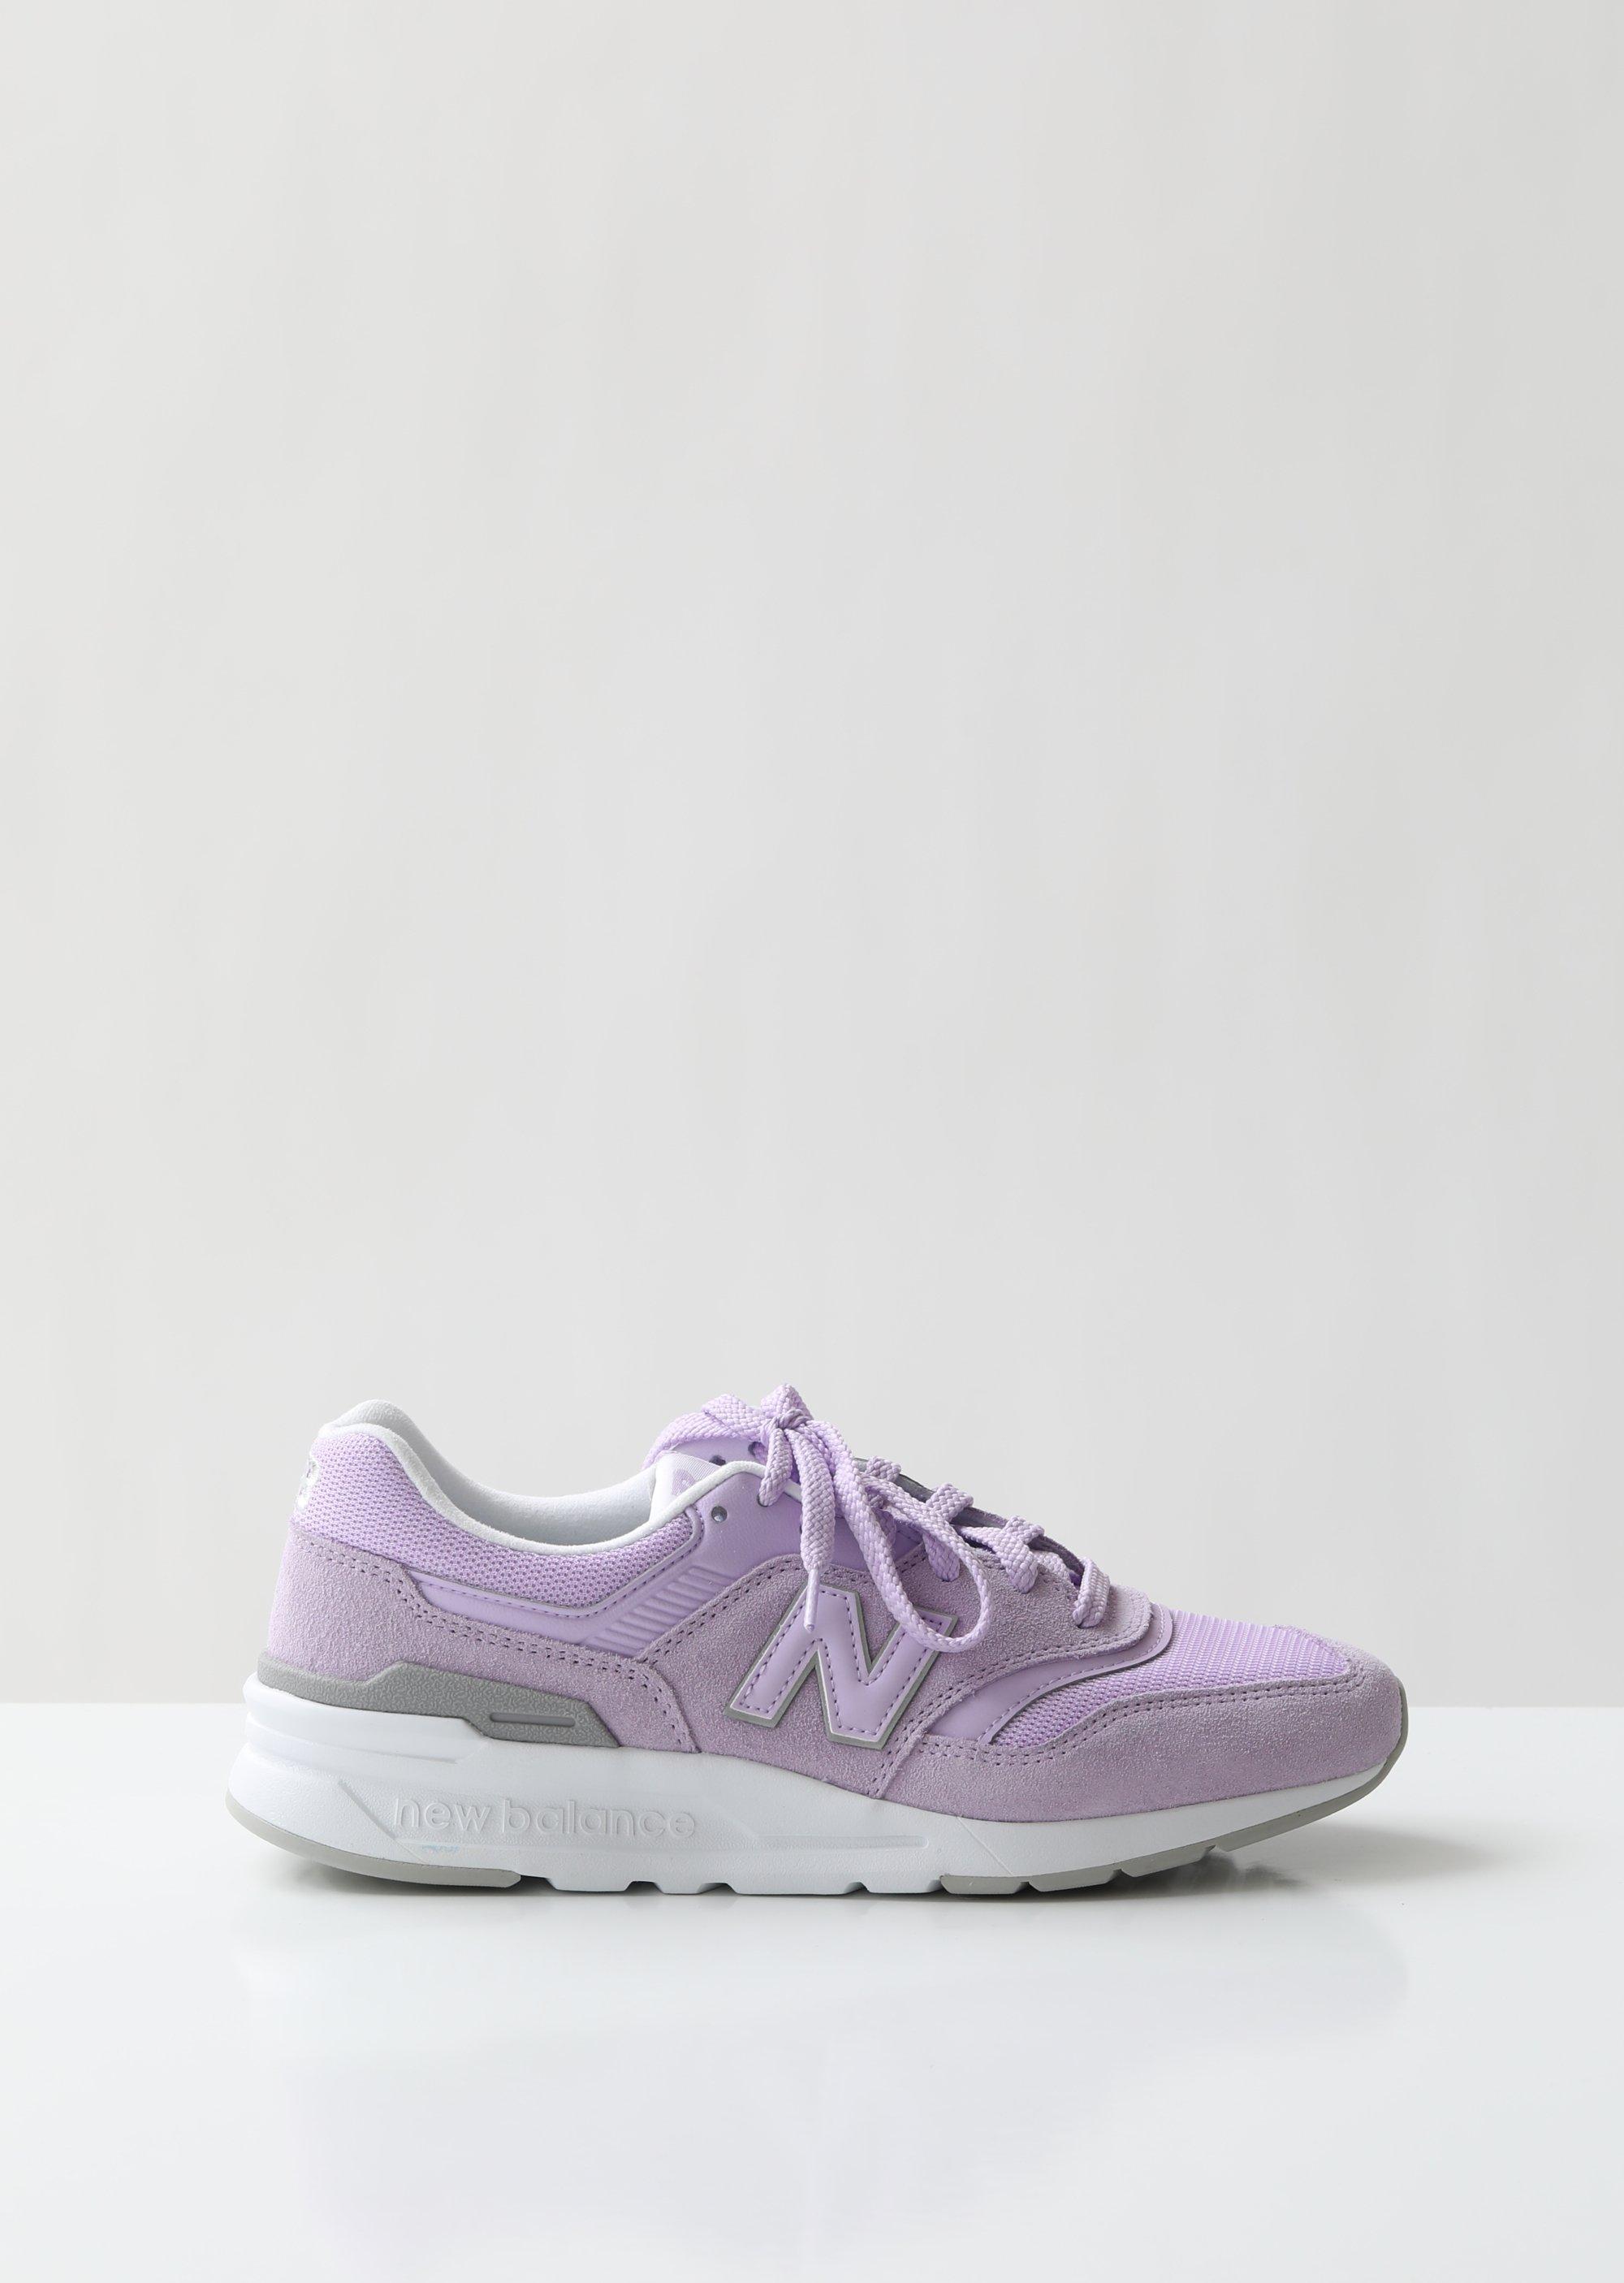 New Balance 997h Classic Essential Suede Mesh Sneakers in Purple - Lyst